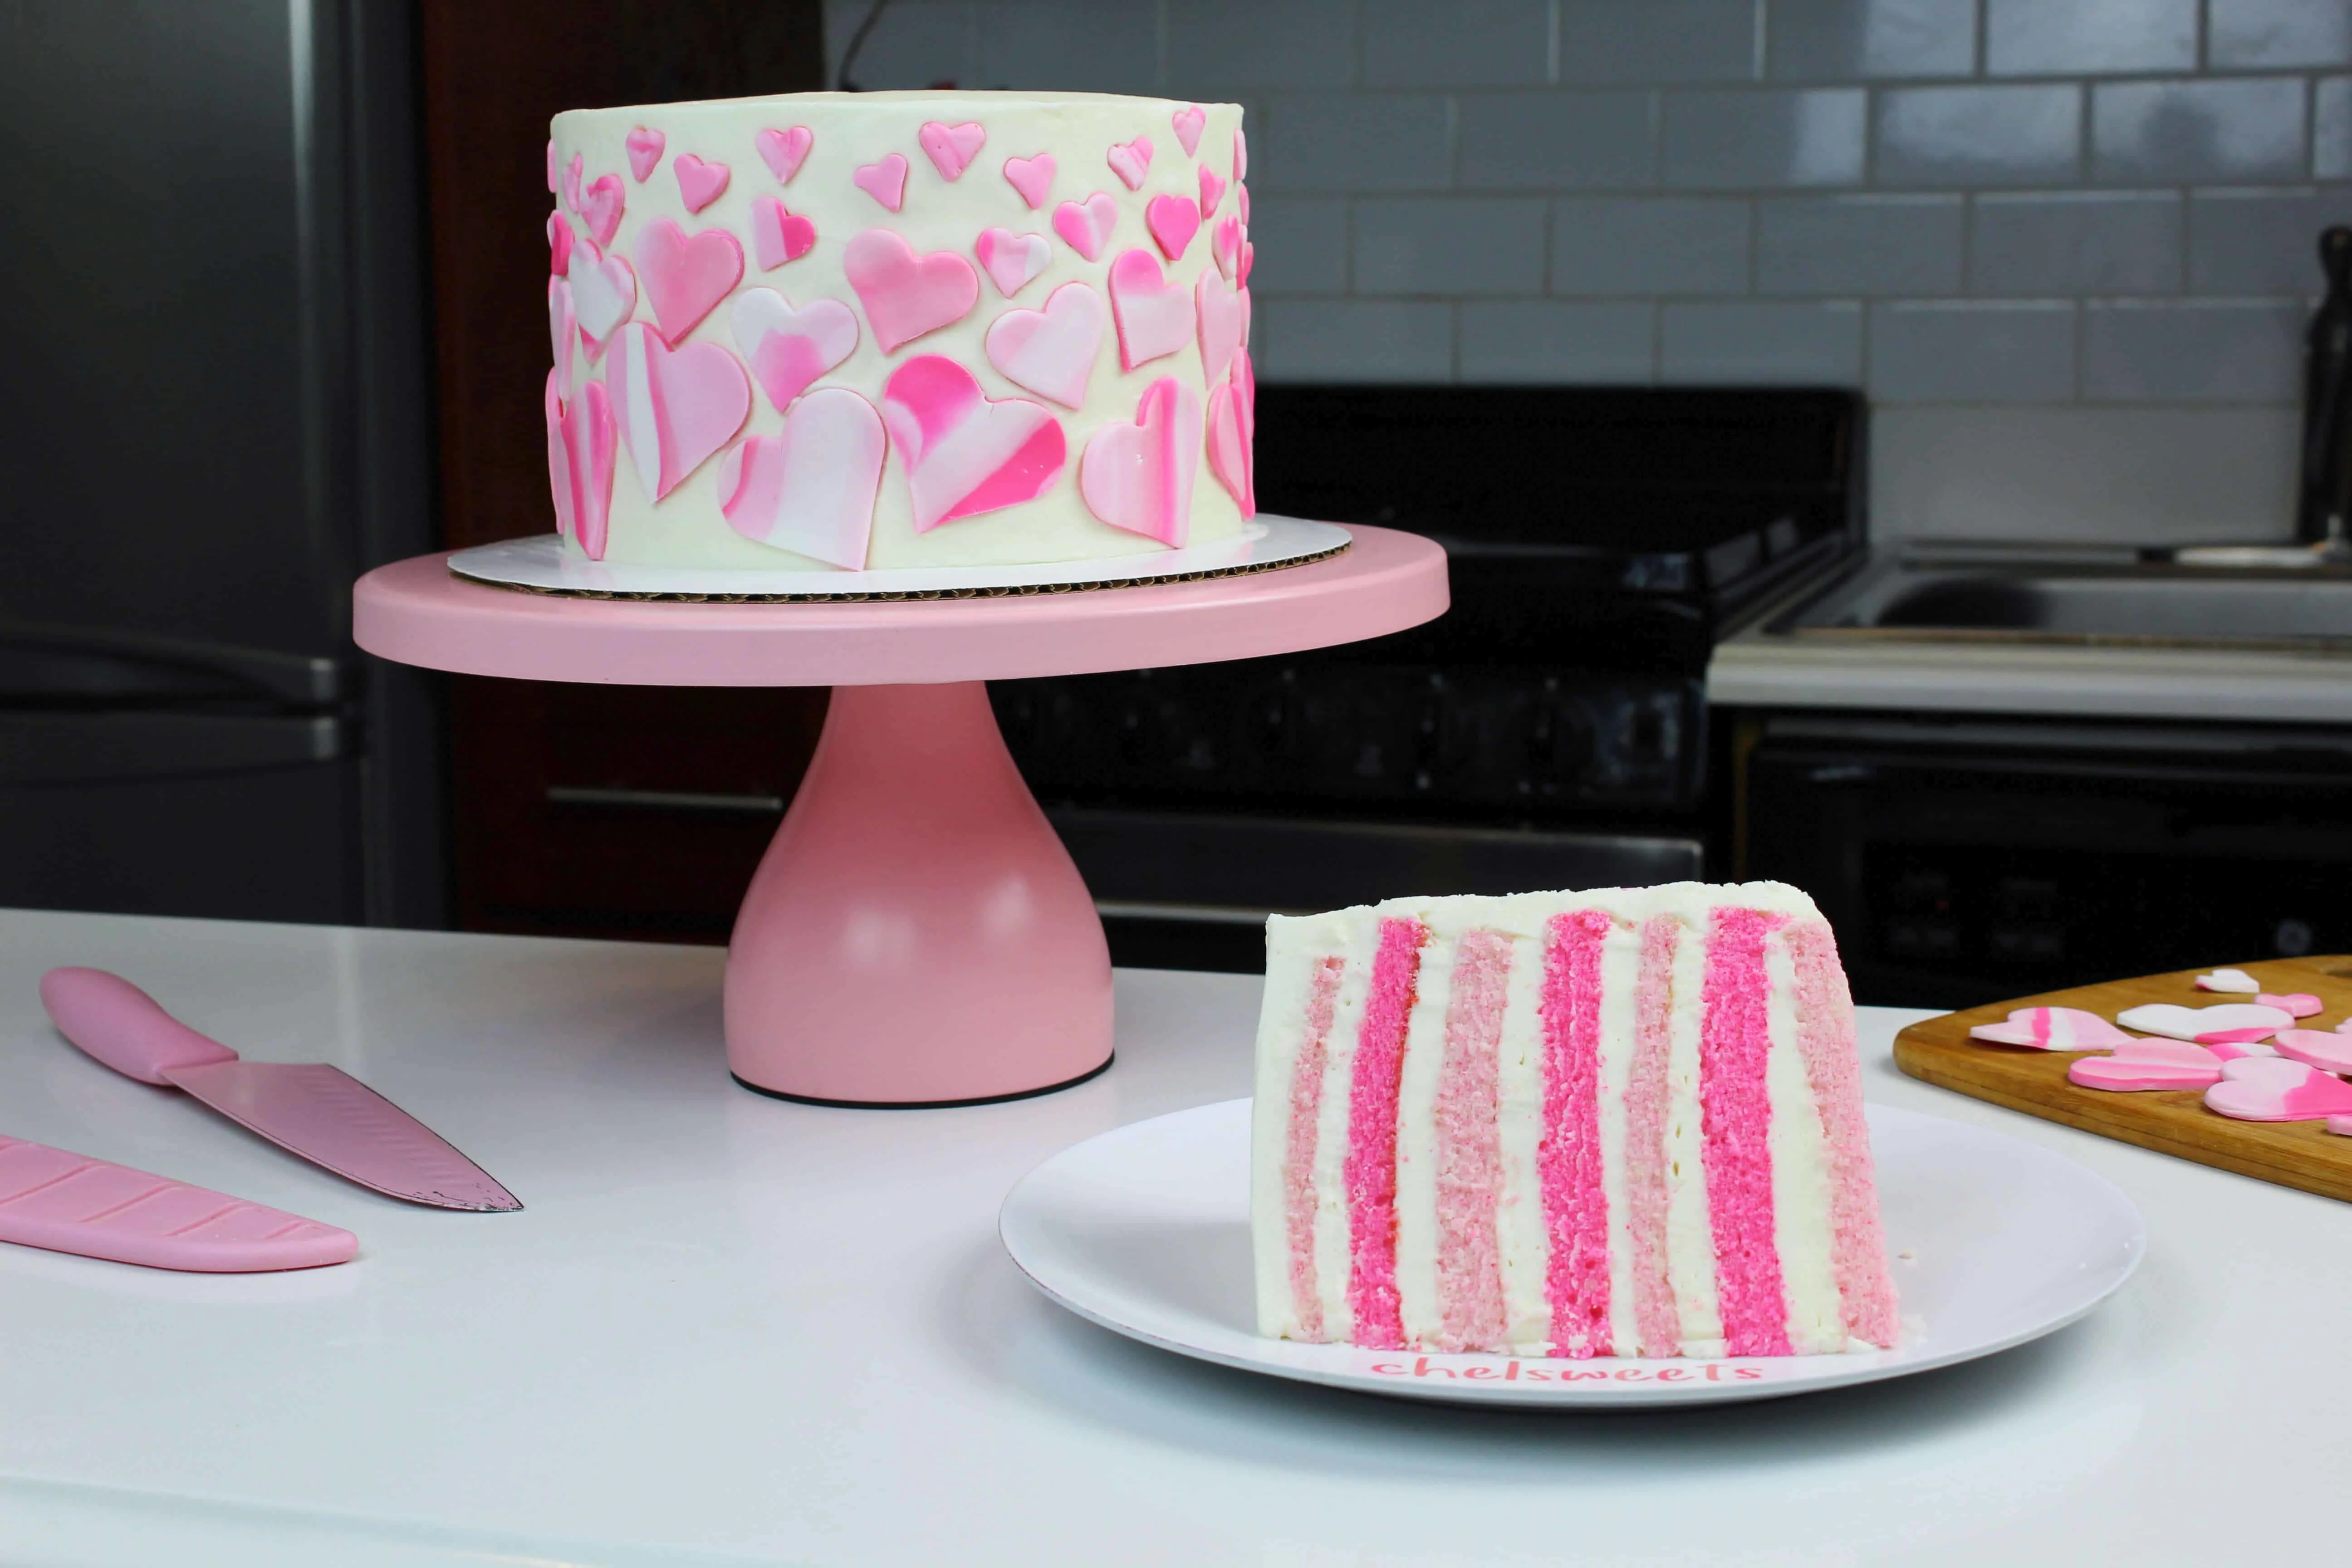 Marbled Hearts Valentine's Day Cake